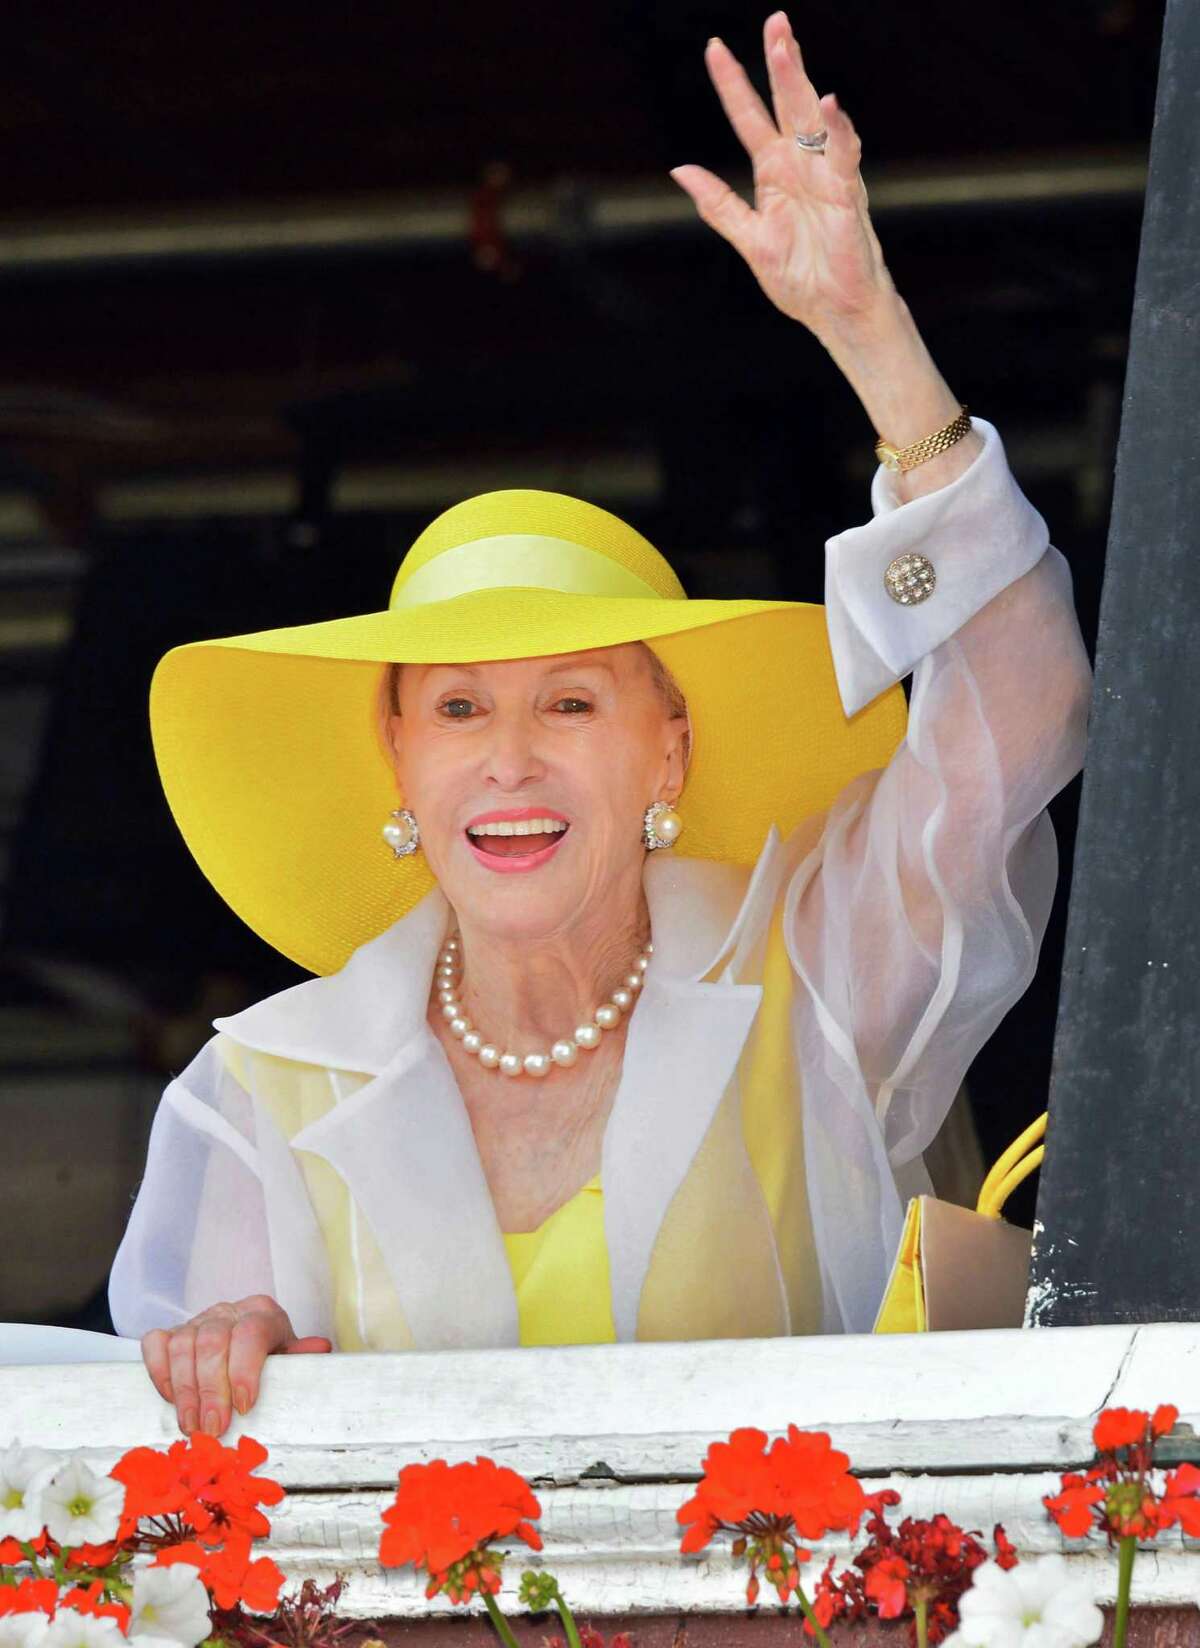 Marylou Whitney waves to fans at Saratoga Race Course Saturday Aug. 3, 2013, in Saratoga Springs, NY. (John Carl D'Annibale / Times Union)